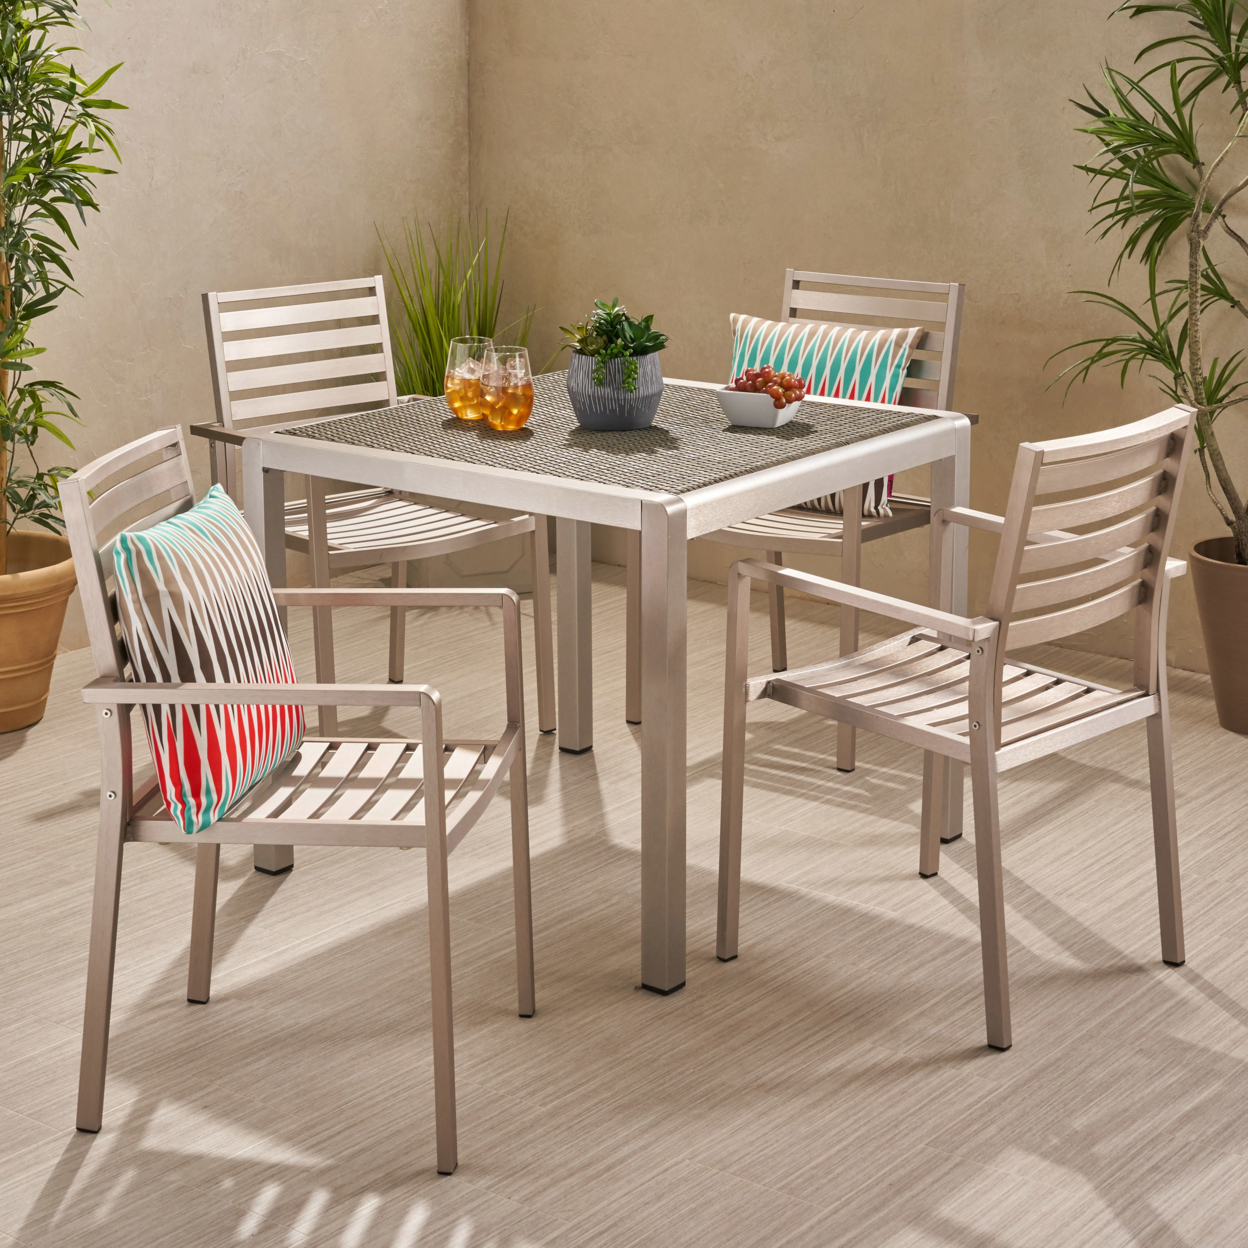 Christal Outdoor Modern 4 Seater Aluminum Dining Set With Faux Wood Table Top - Aluminum + Faux Wood